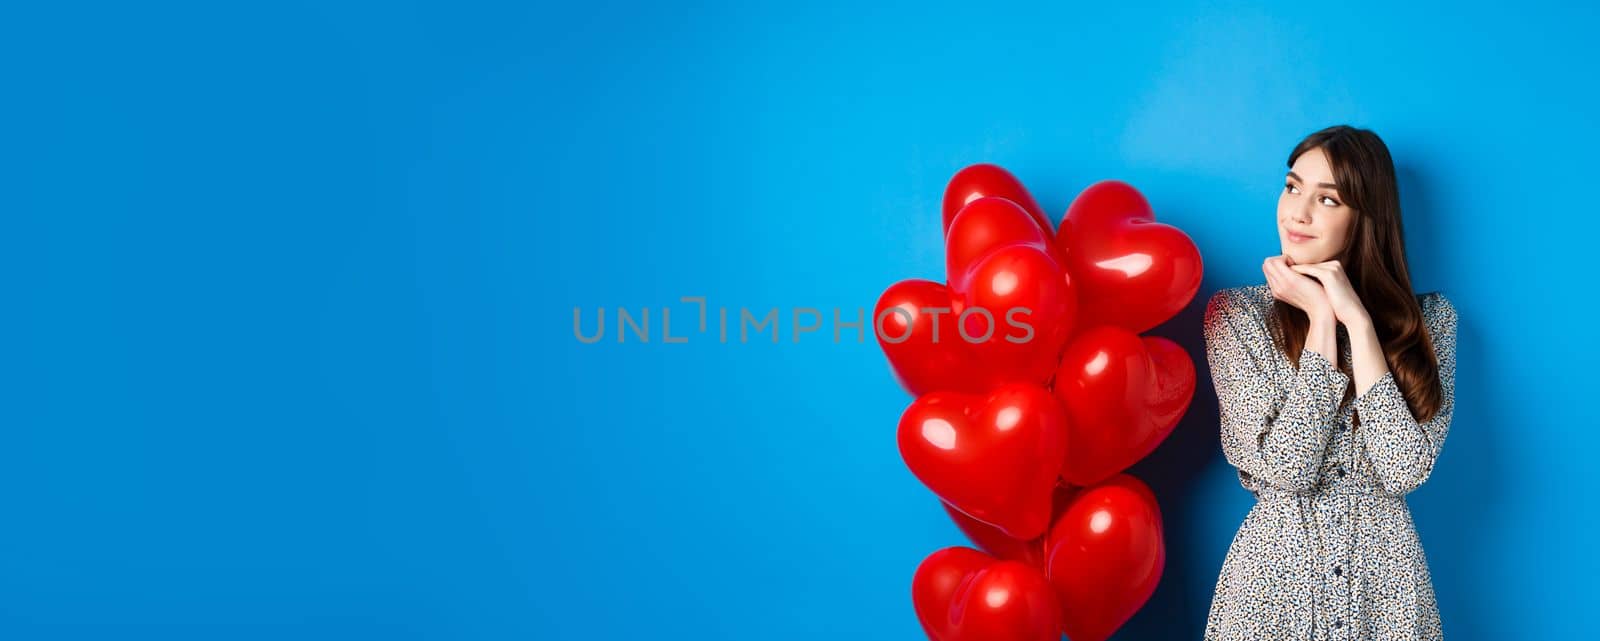 Valentines day. Dreamy beautiful woman in dress, imaging romantic date, standing near red hearts balloons and smiling, standing on blue background.